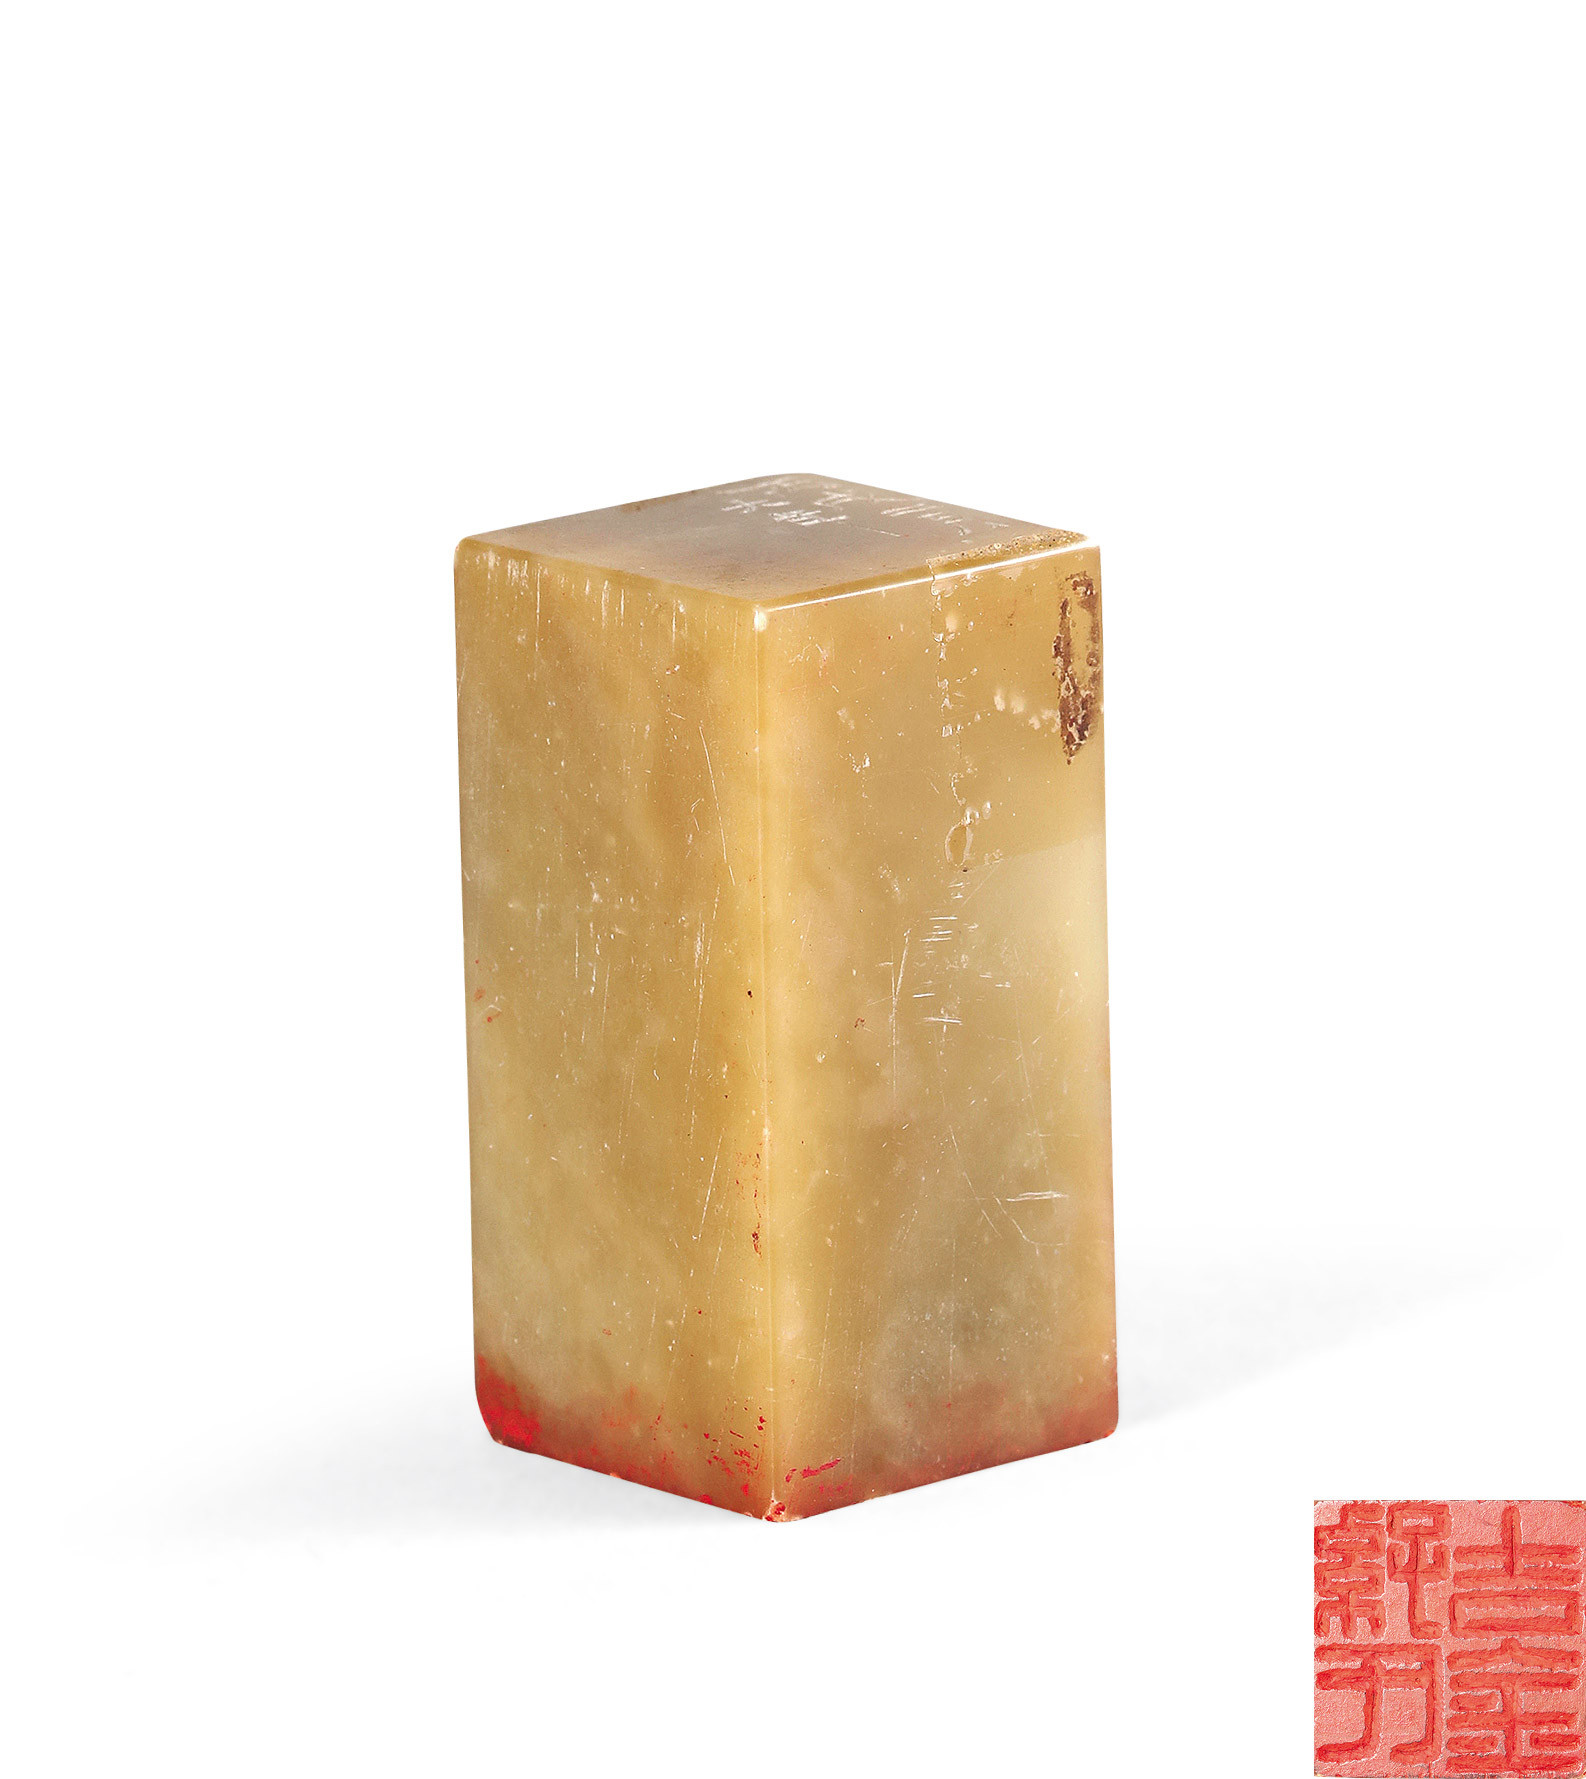 SHOUSHAN STONE CARVED SQUARE SEAL BY TONG DANIAN